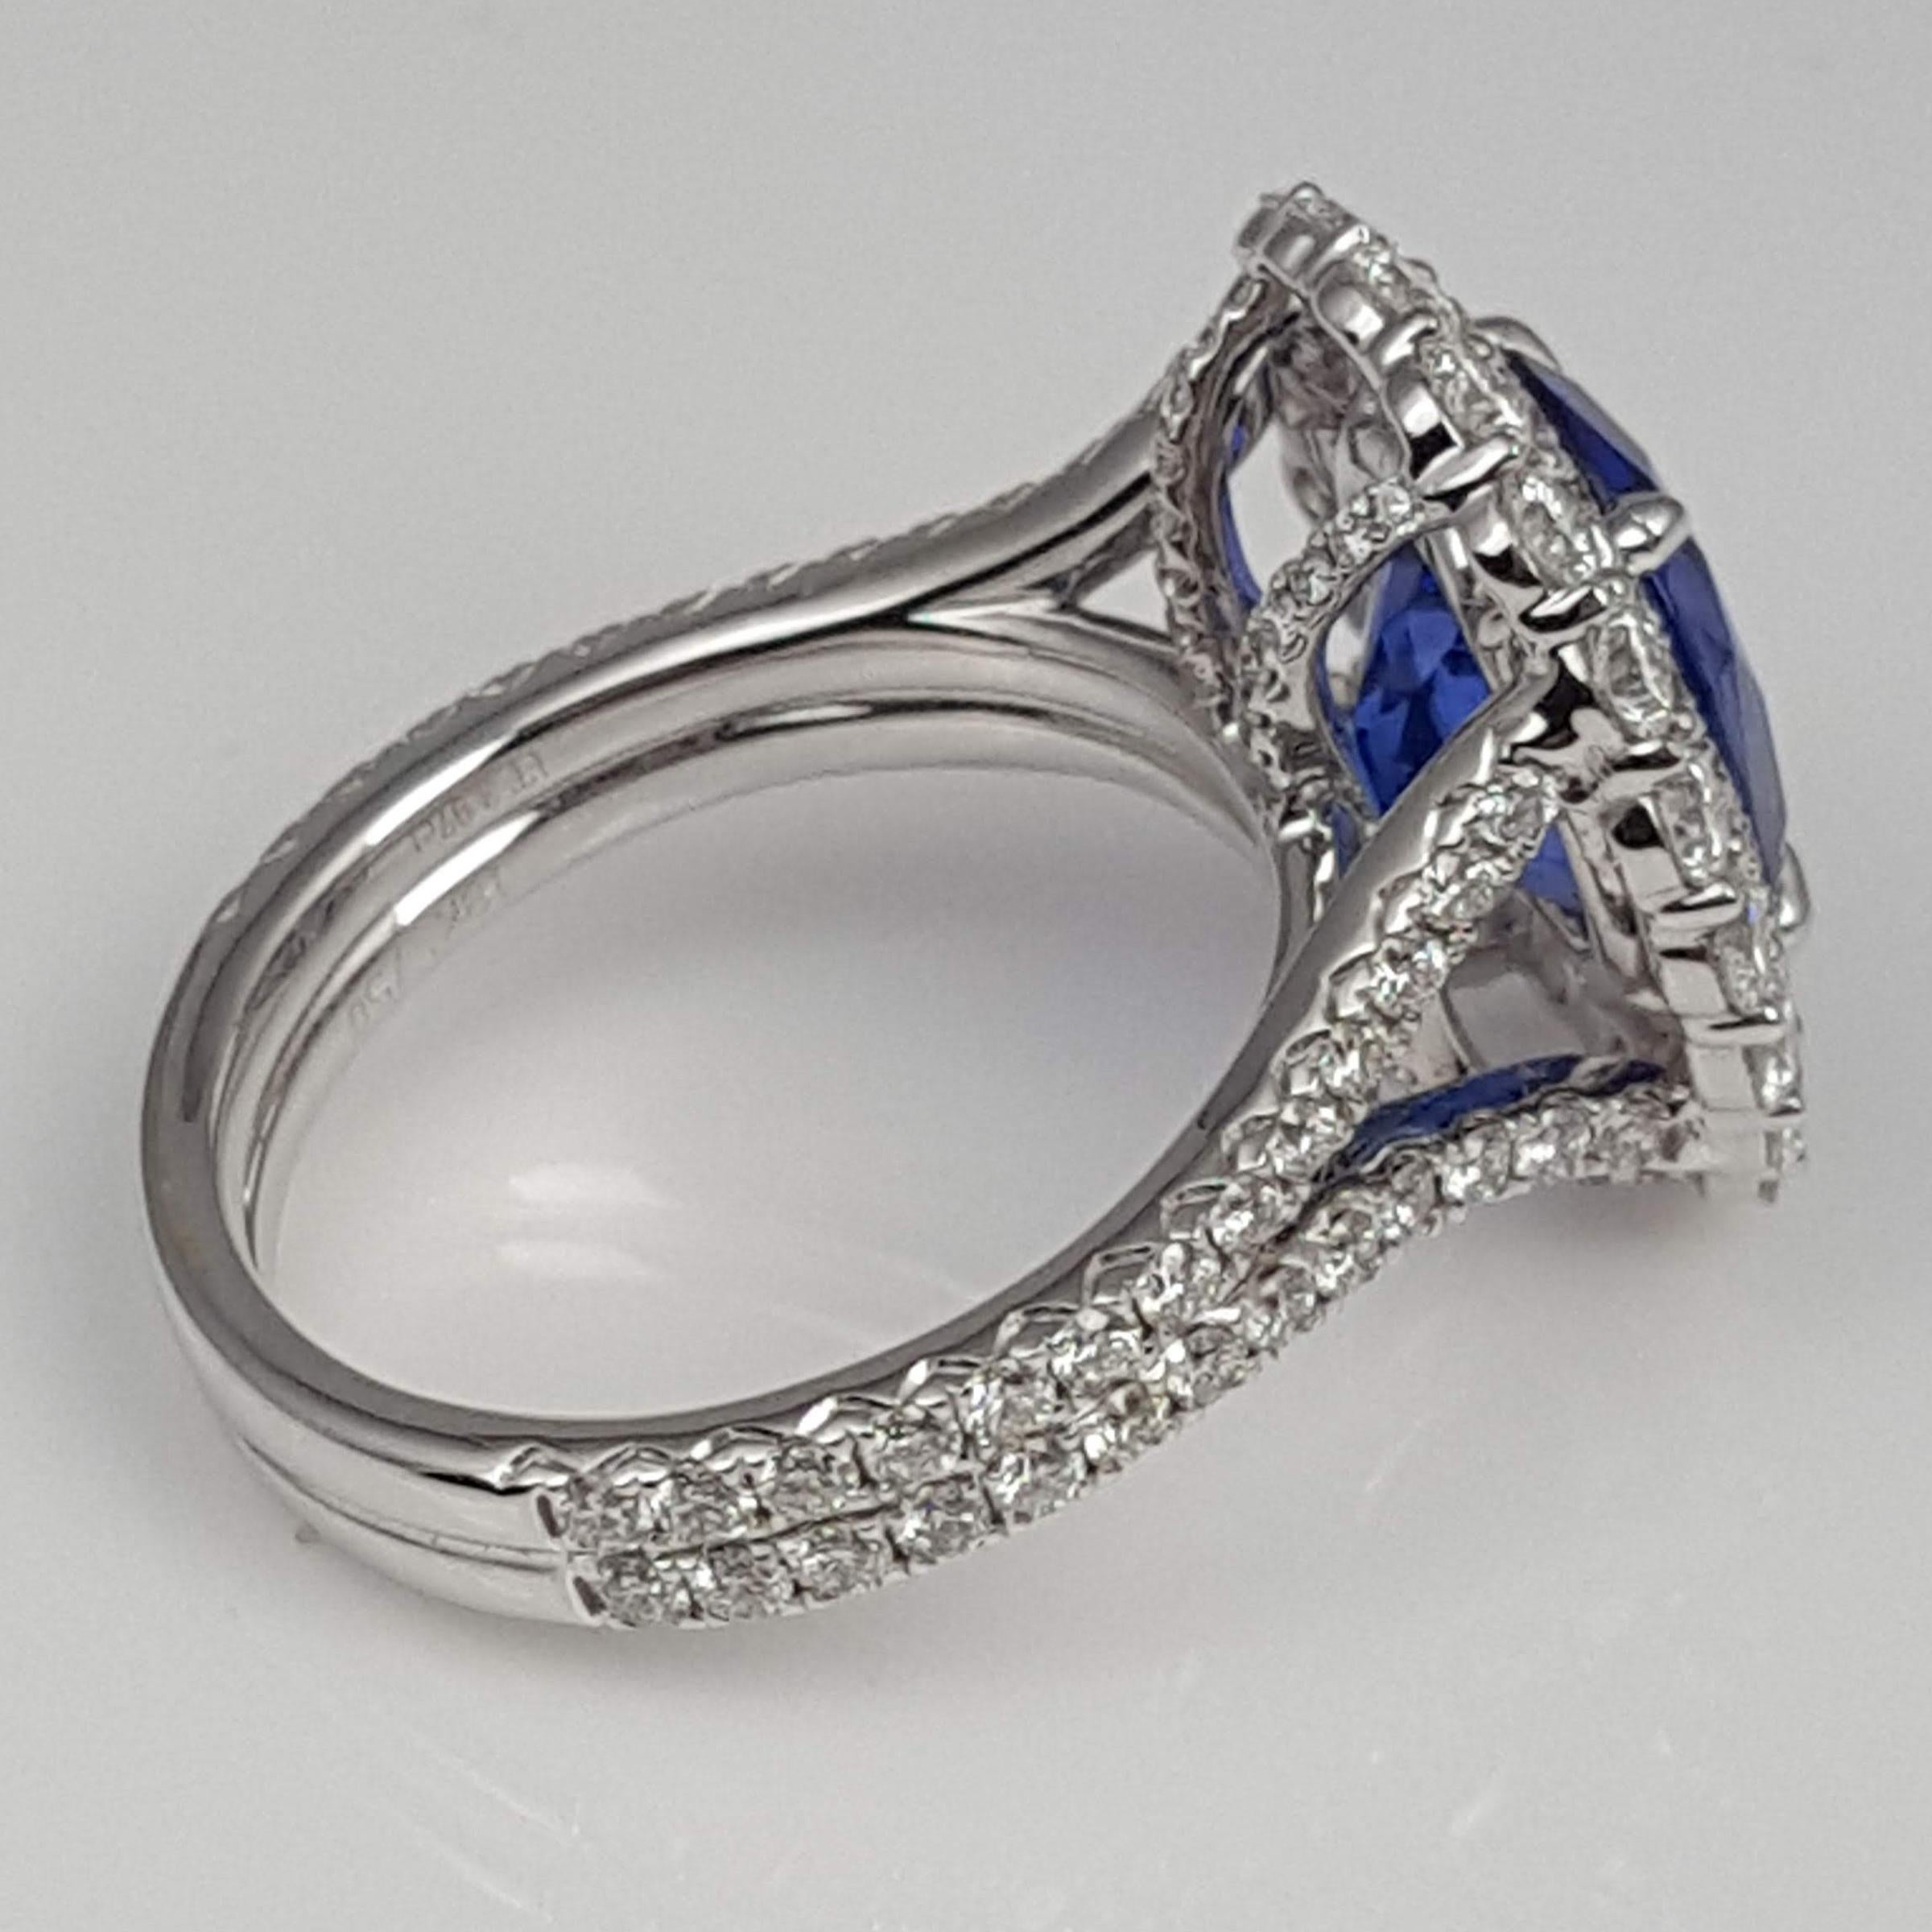 Women's GIA Certified 3.97 Carat Oval Cut Tanzanite and Diamond Halo Ring ref632 For Sale